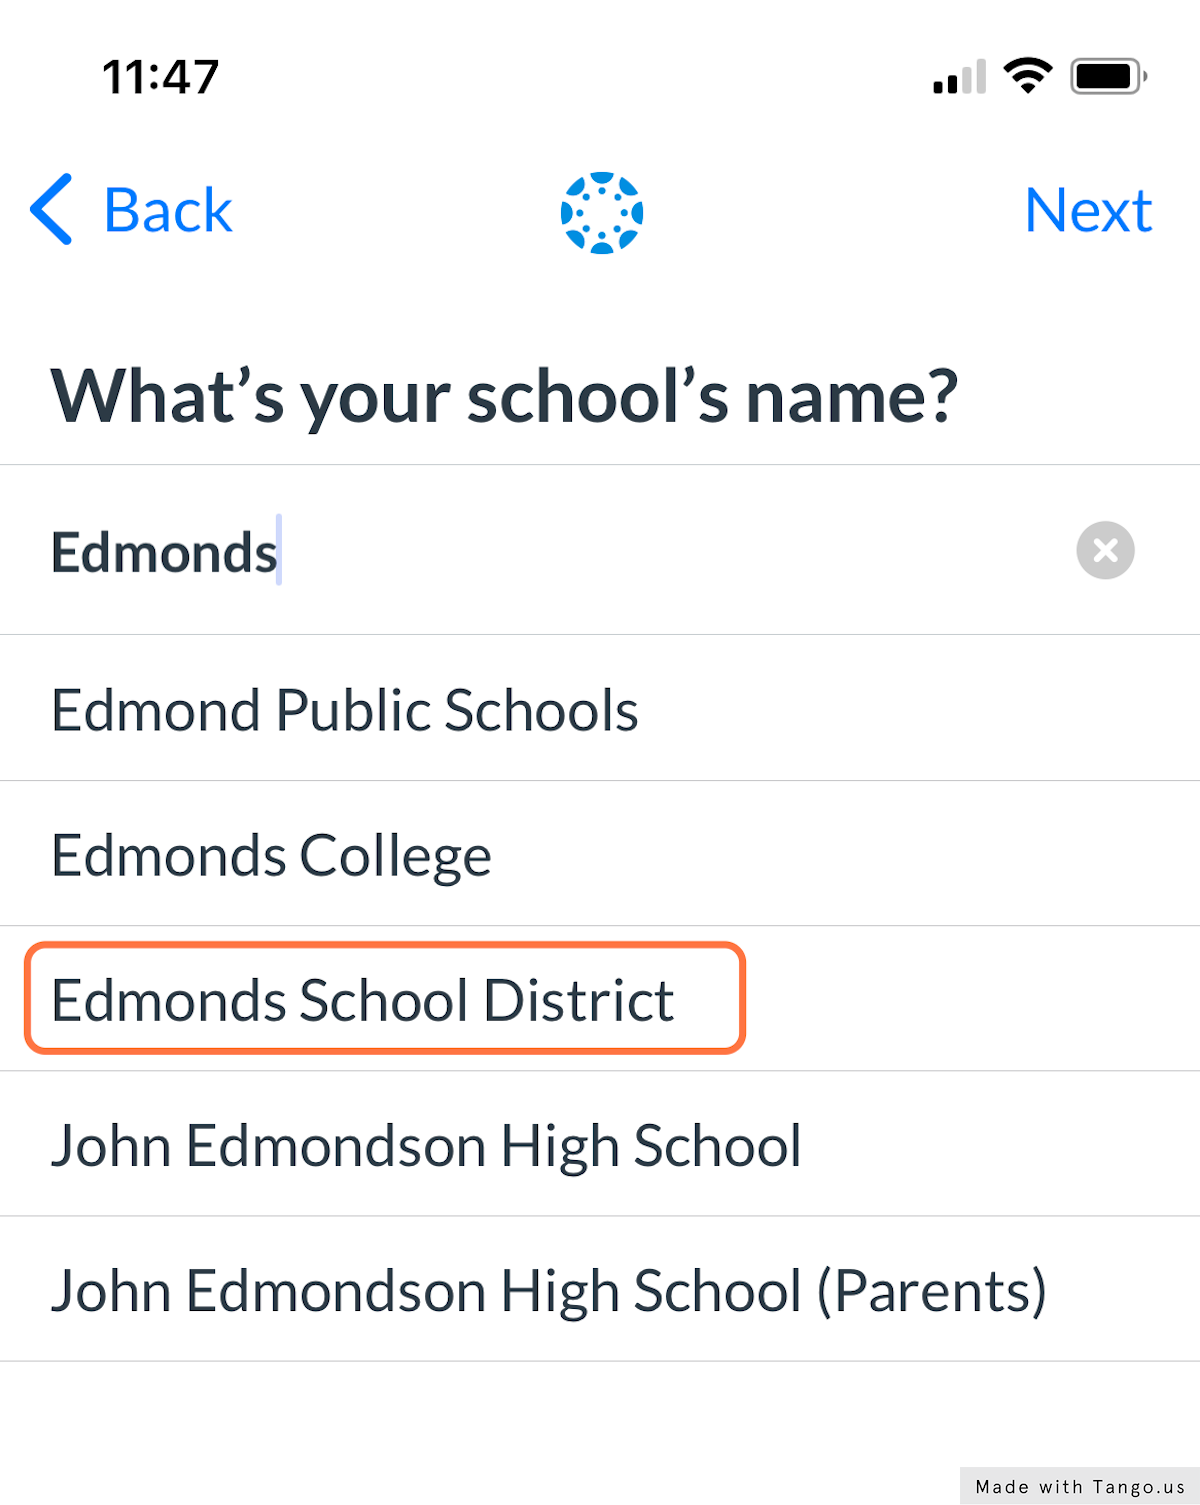 Select Edmonds School District from the list